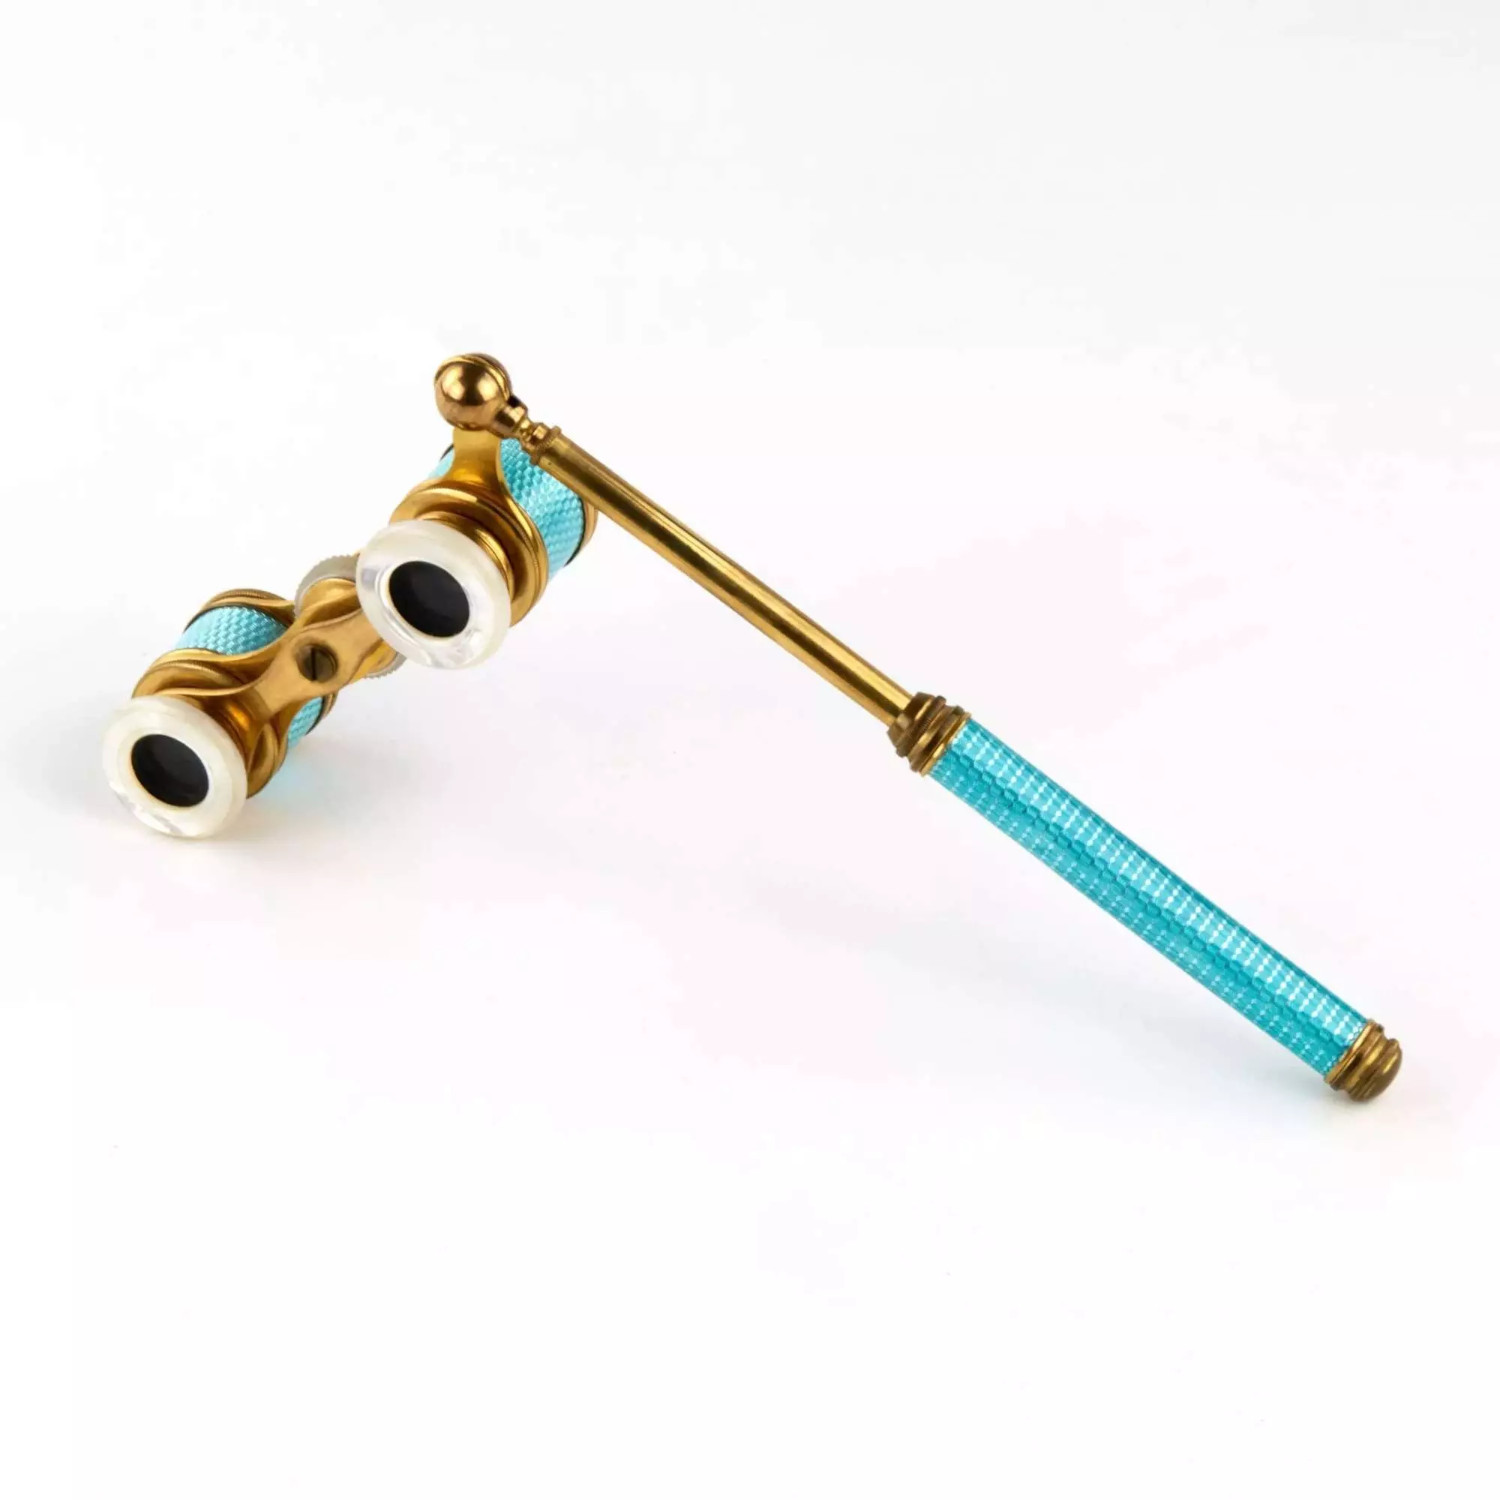 Theatrical binoculars with guilloche enamel, with a handle